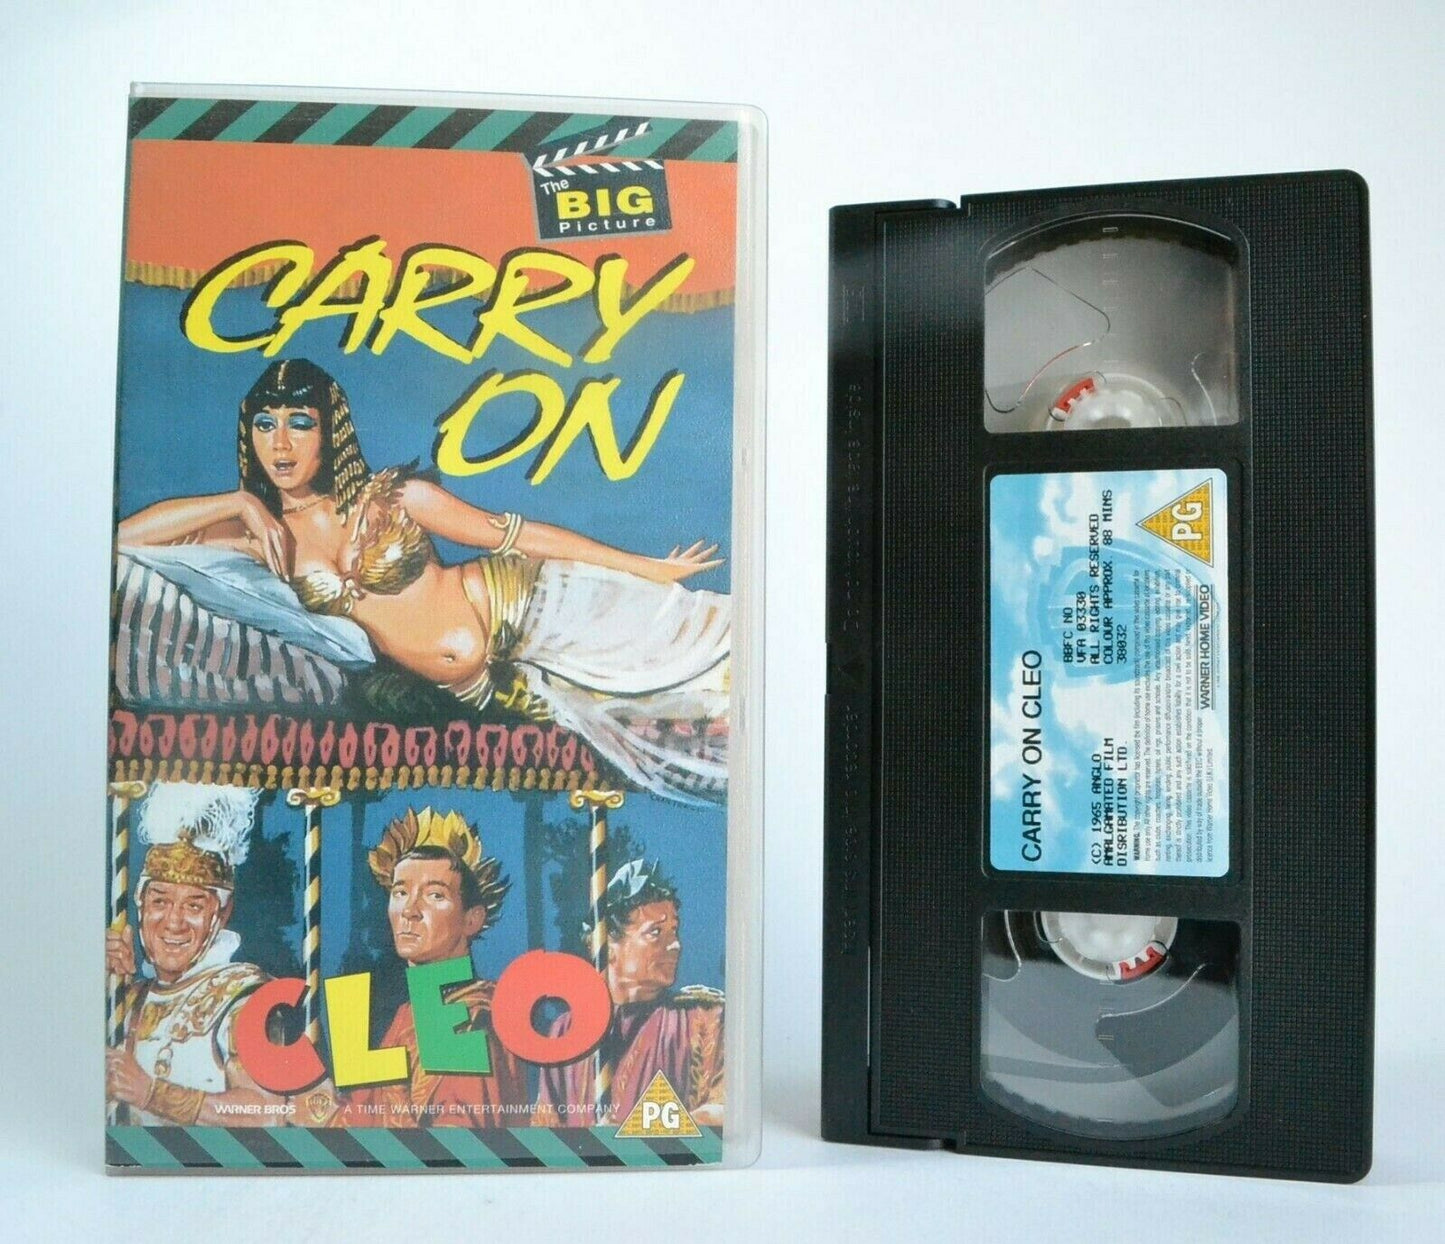 Carry On: Cleo (1964) - 10th "Carry On" Film Series - British Comedy - Pal VHS-